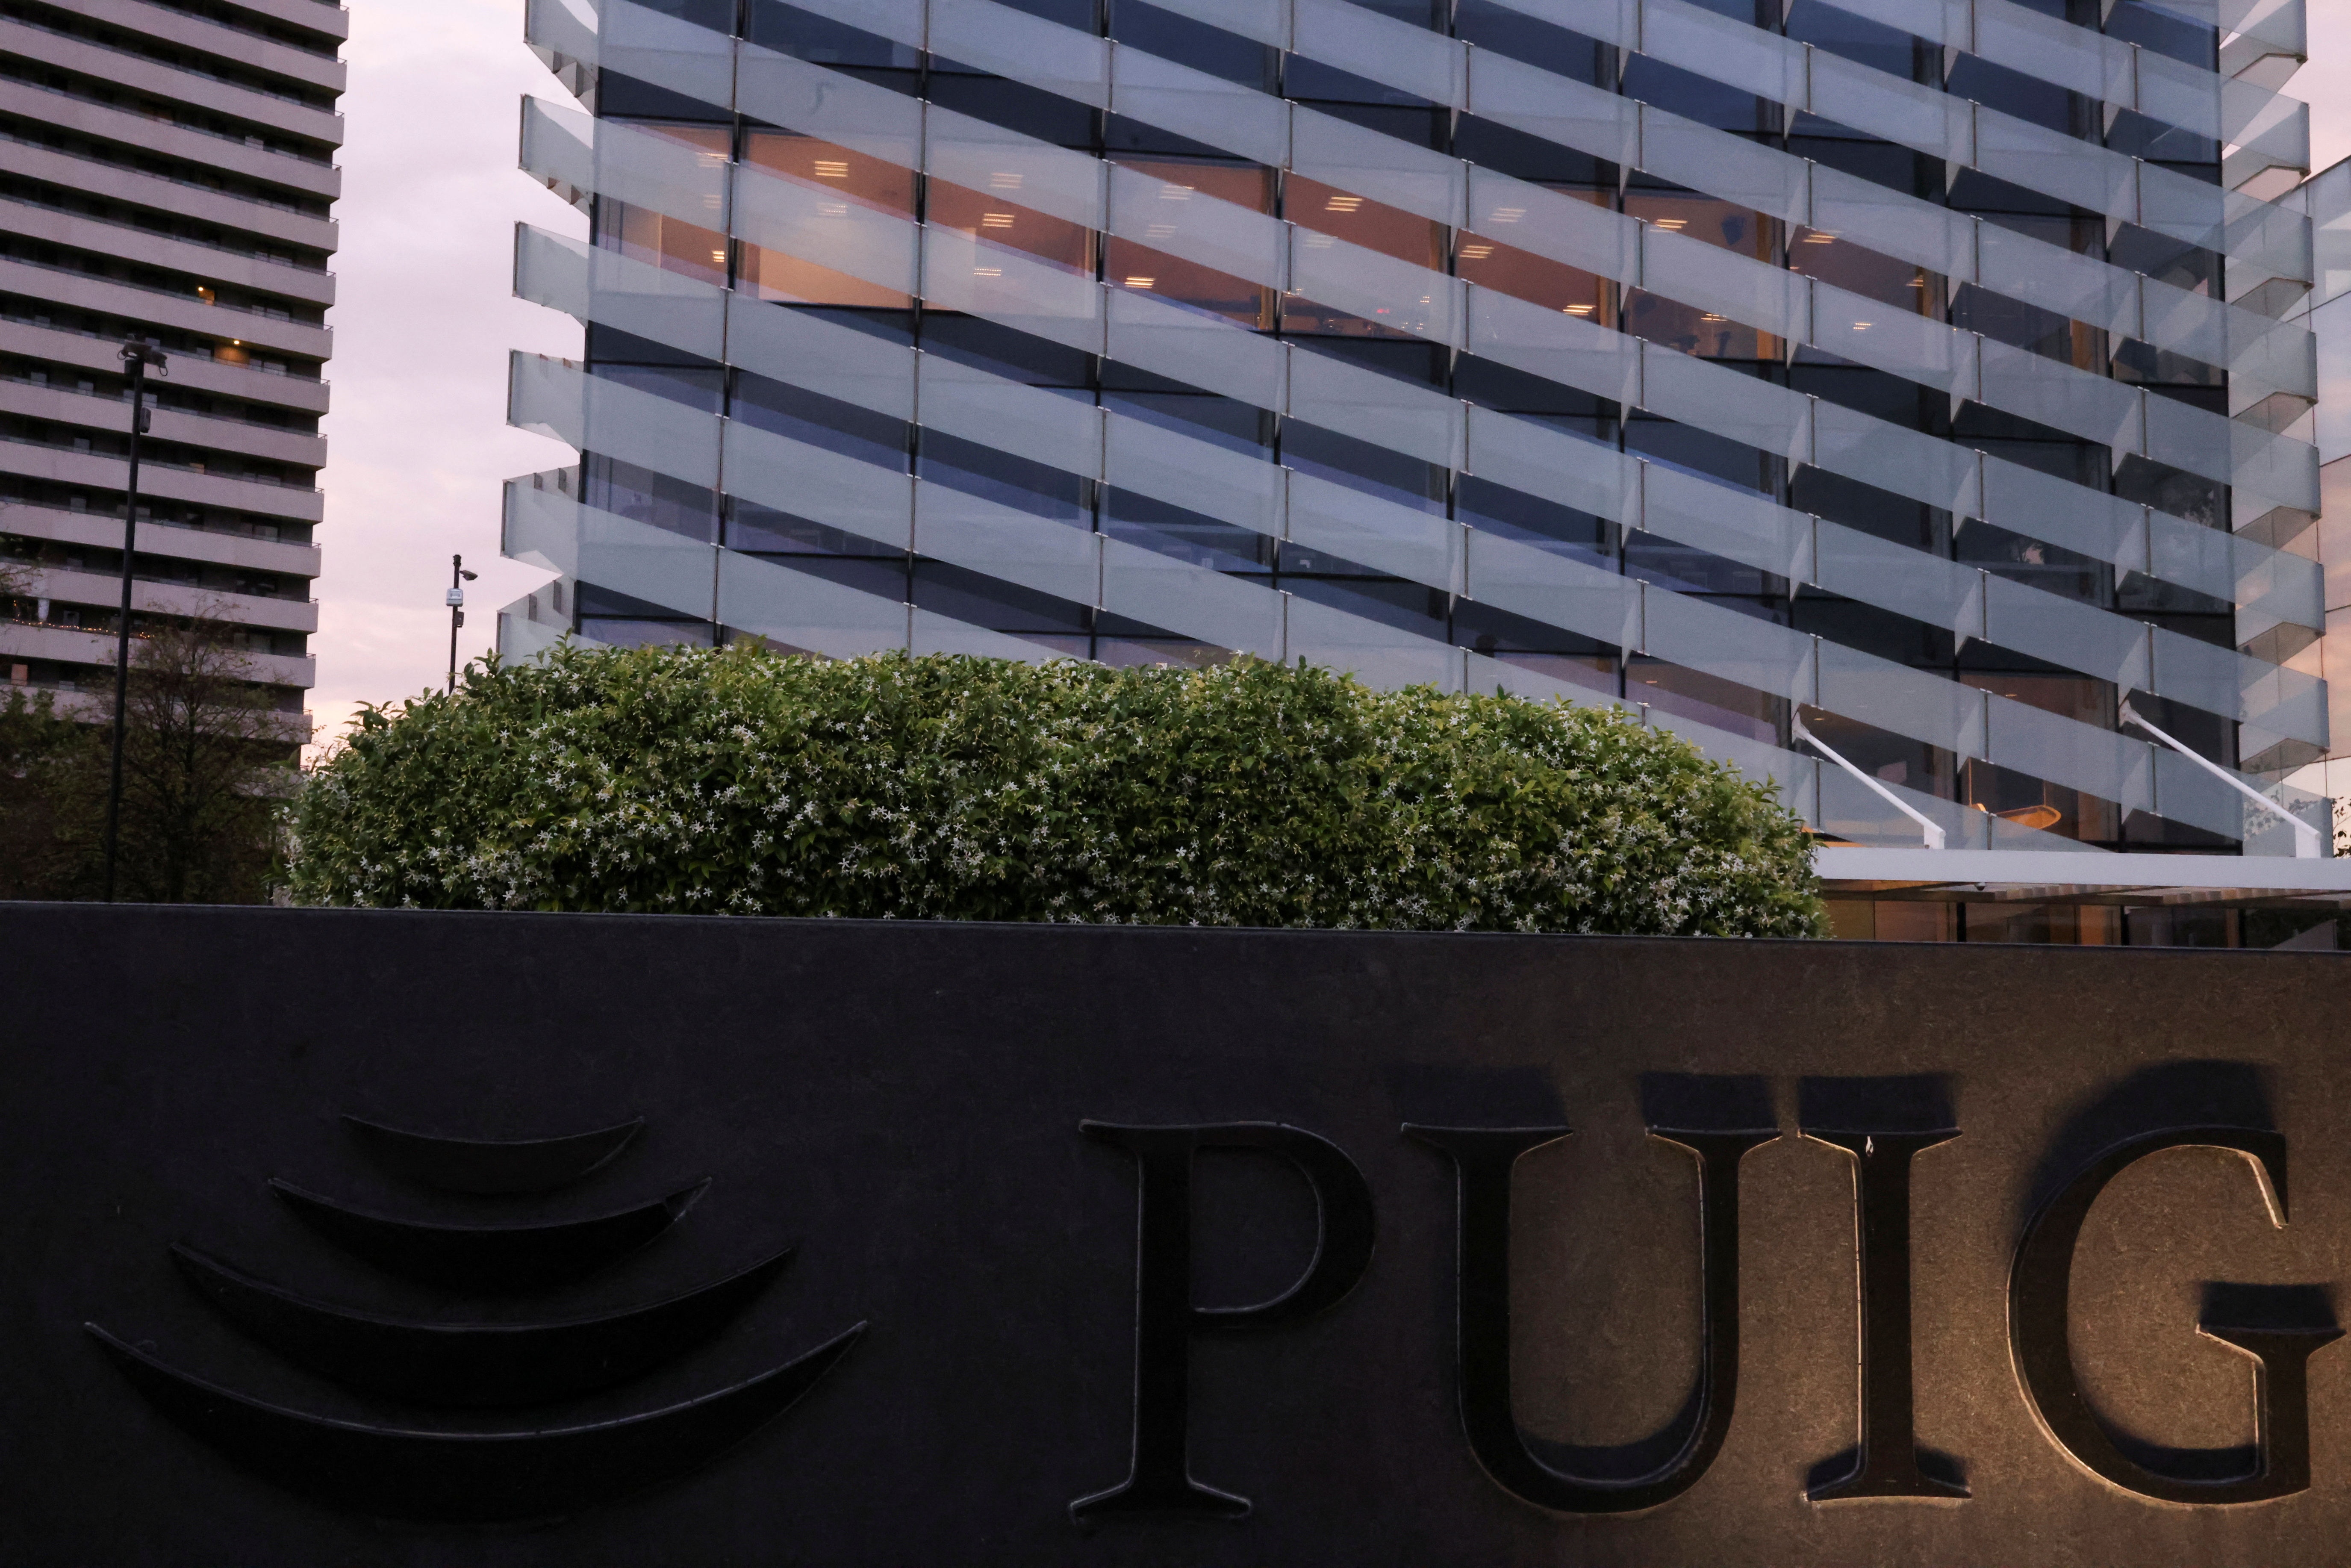 Spain's Puig prices shares at top of range in oversubscribed IPO